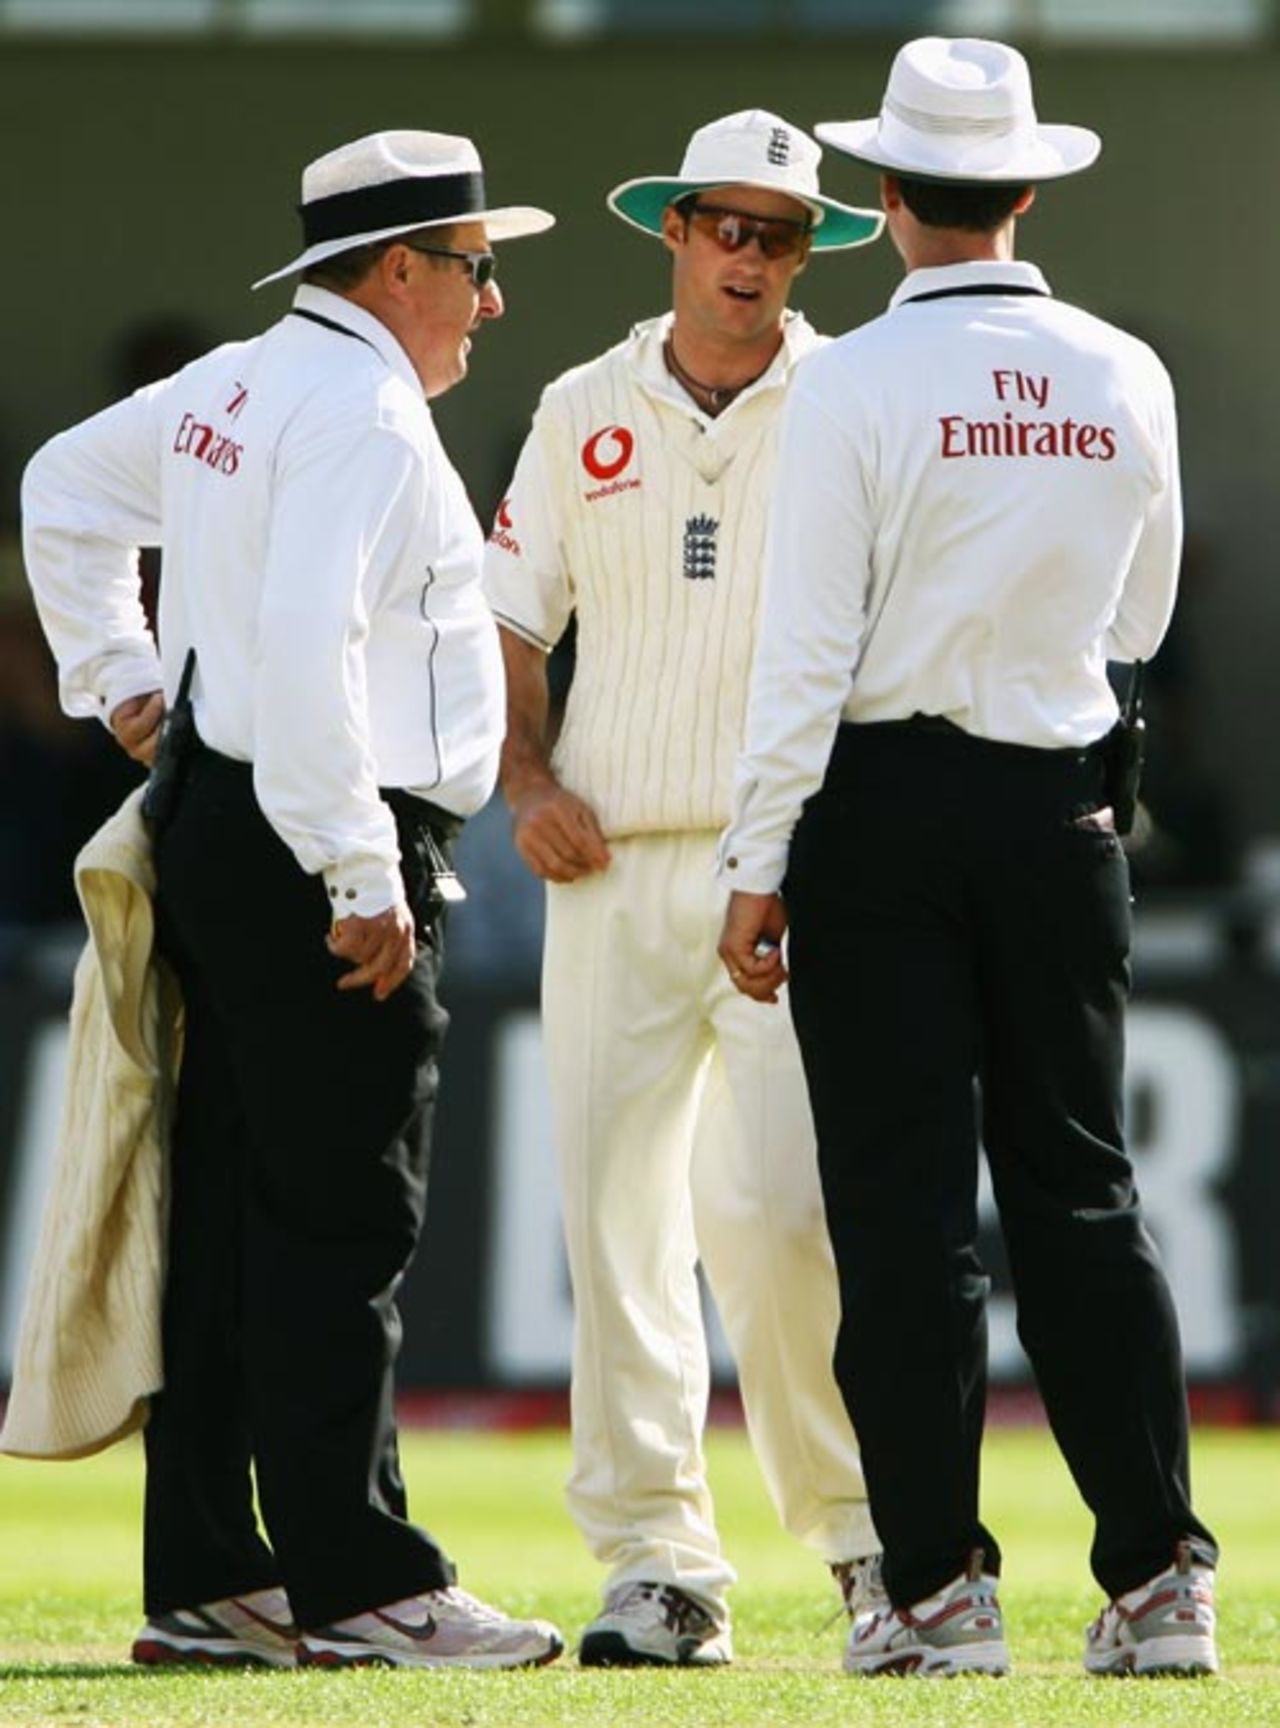 Andrew Strauss, the stand-in captain, talks with Simon Taufel and Ian Howell after a heated incident involving Kevin Pietersen and Zaheer Khan, England v India, 2nd Test, Trent Bridge, 3rd day, July 29, 2007